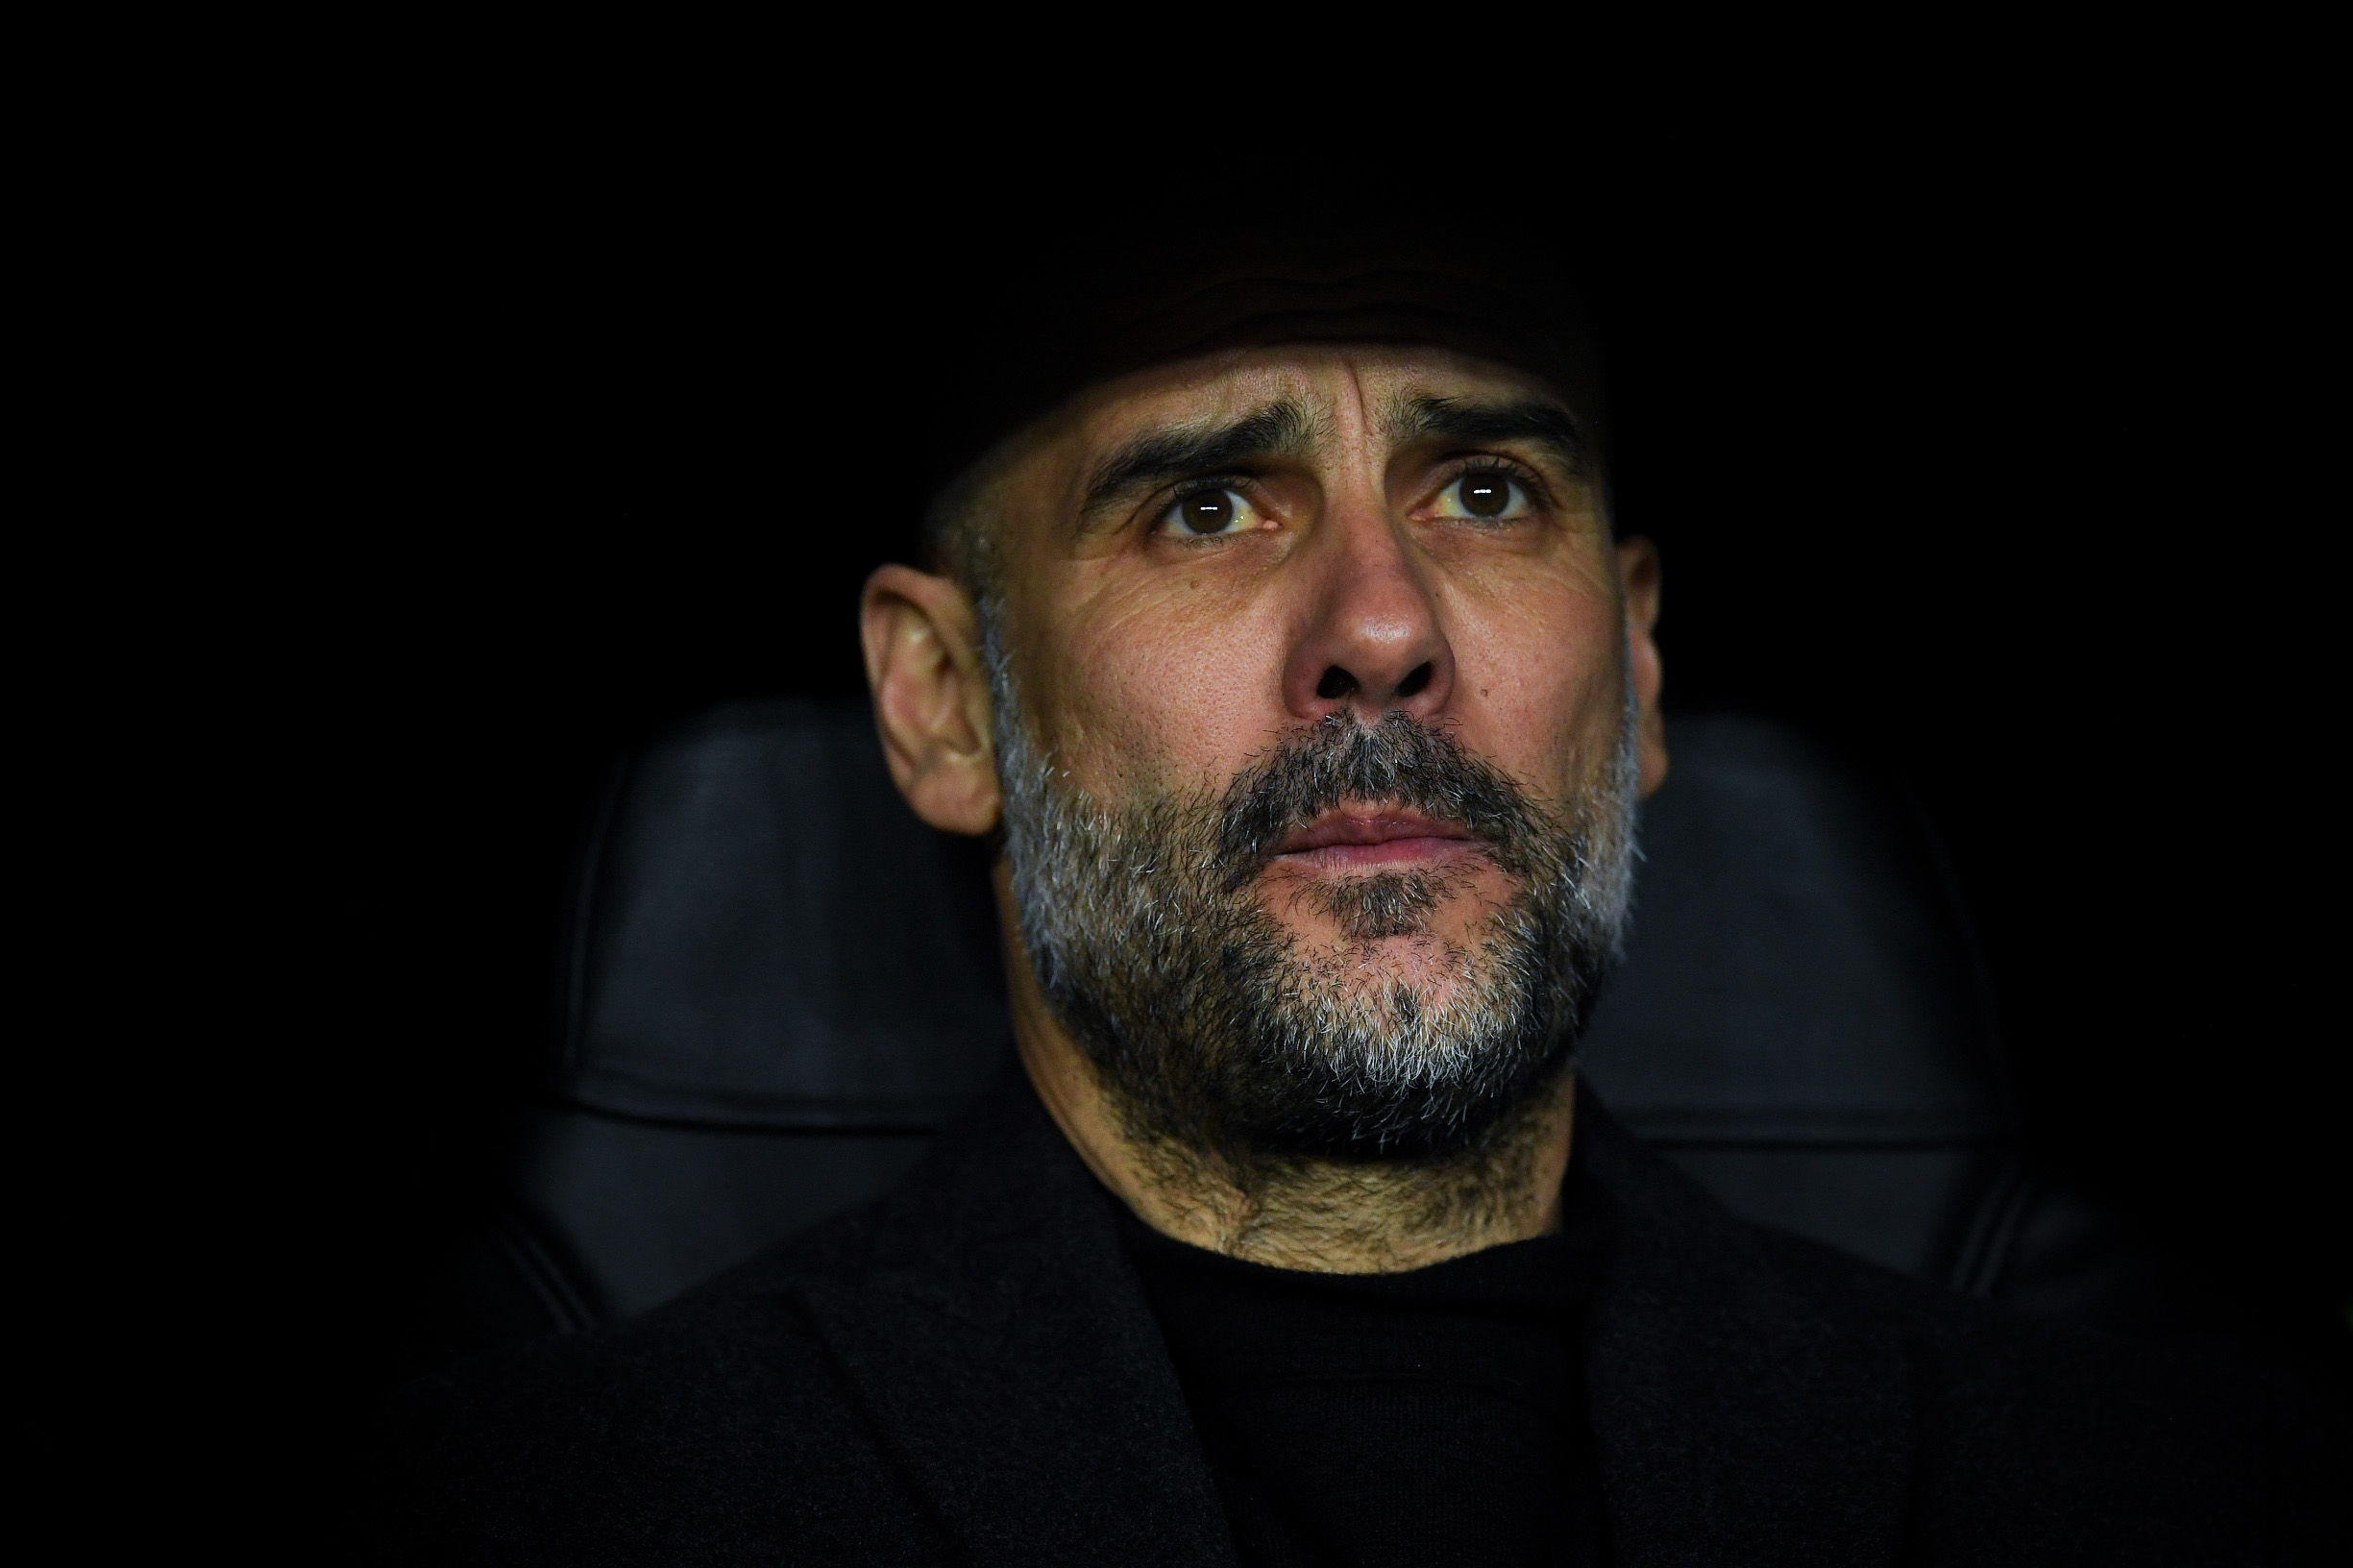 MADRID, SPAIN - FEBRUARY 26: Josep Guardiola, manager of Manchester City FC looks on during the UEFA Champions League round of 16 first leg match between Real Madrid and Manchester City at Bernabeu on February 26, 2020 in Madrid, Spain. (Photo by David Ramos/Getty Images)